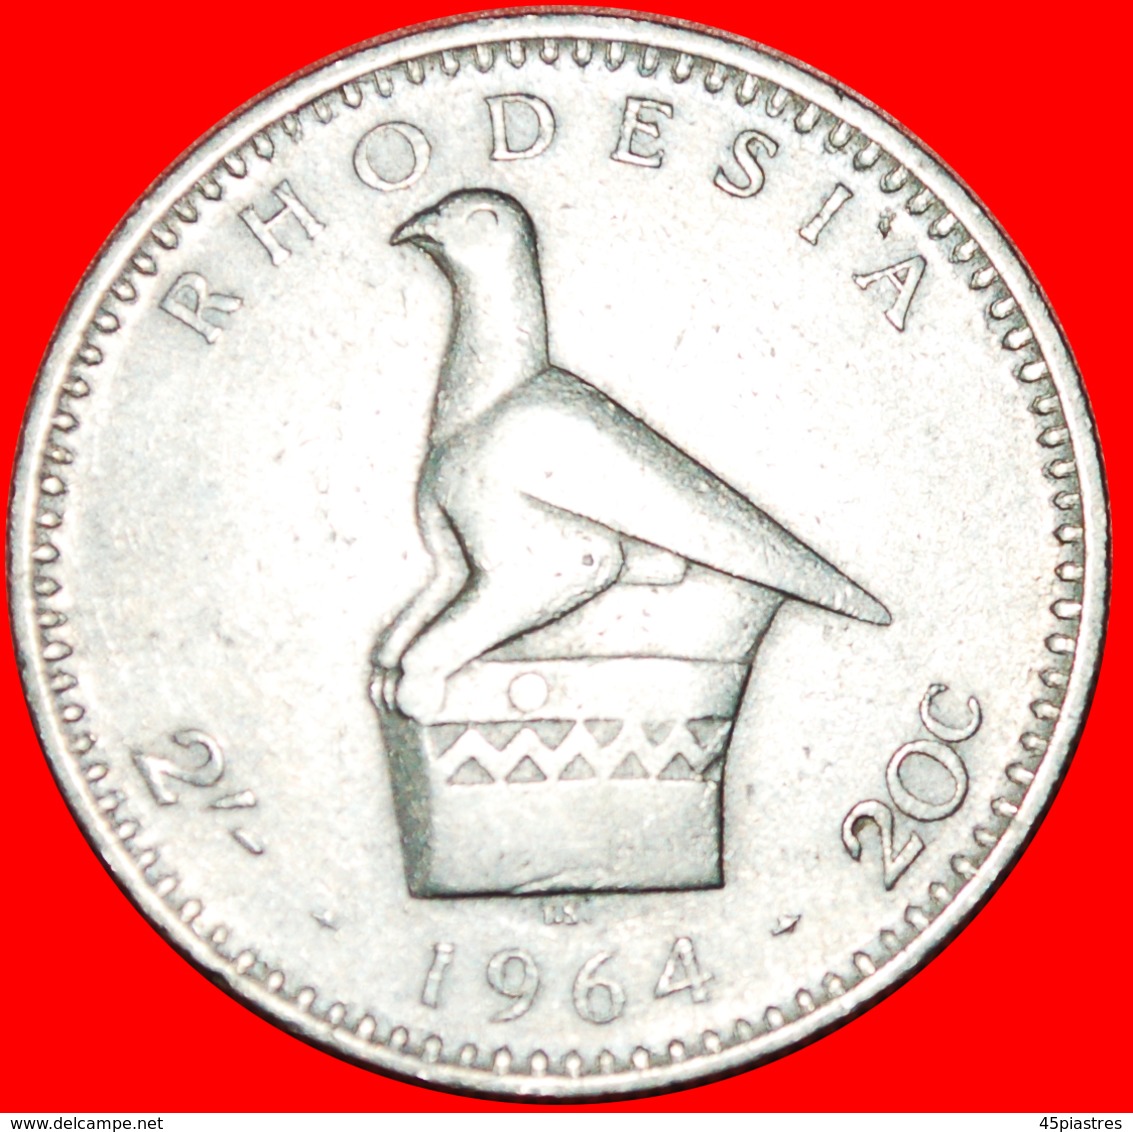 + SOUTH AFRICA : RHODESIA ★ 2 SHILLINGS  20 CENTS 1964 BIRD! LOW START ★ NO RESERVE! - Rhodesia